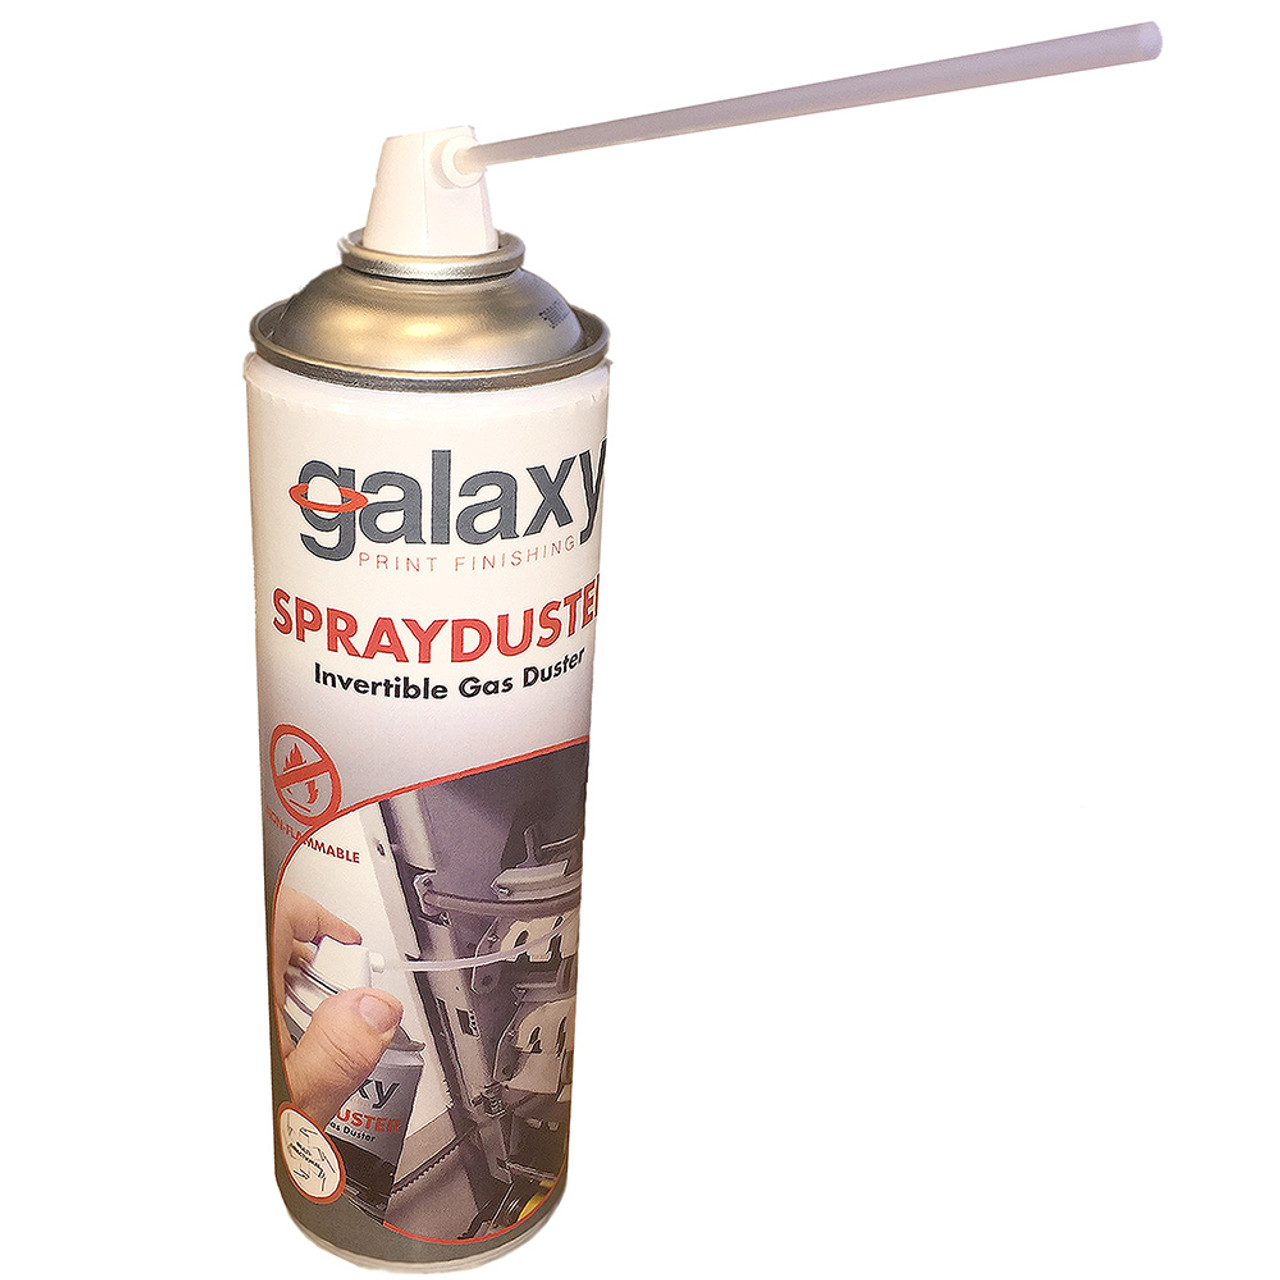 Galaxy Compressed Air Invertible Gas Spray Duster Cleaner- 400ml